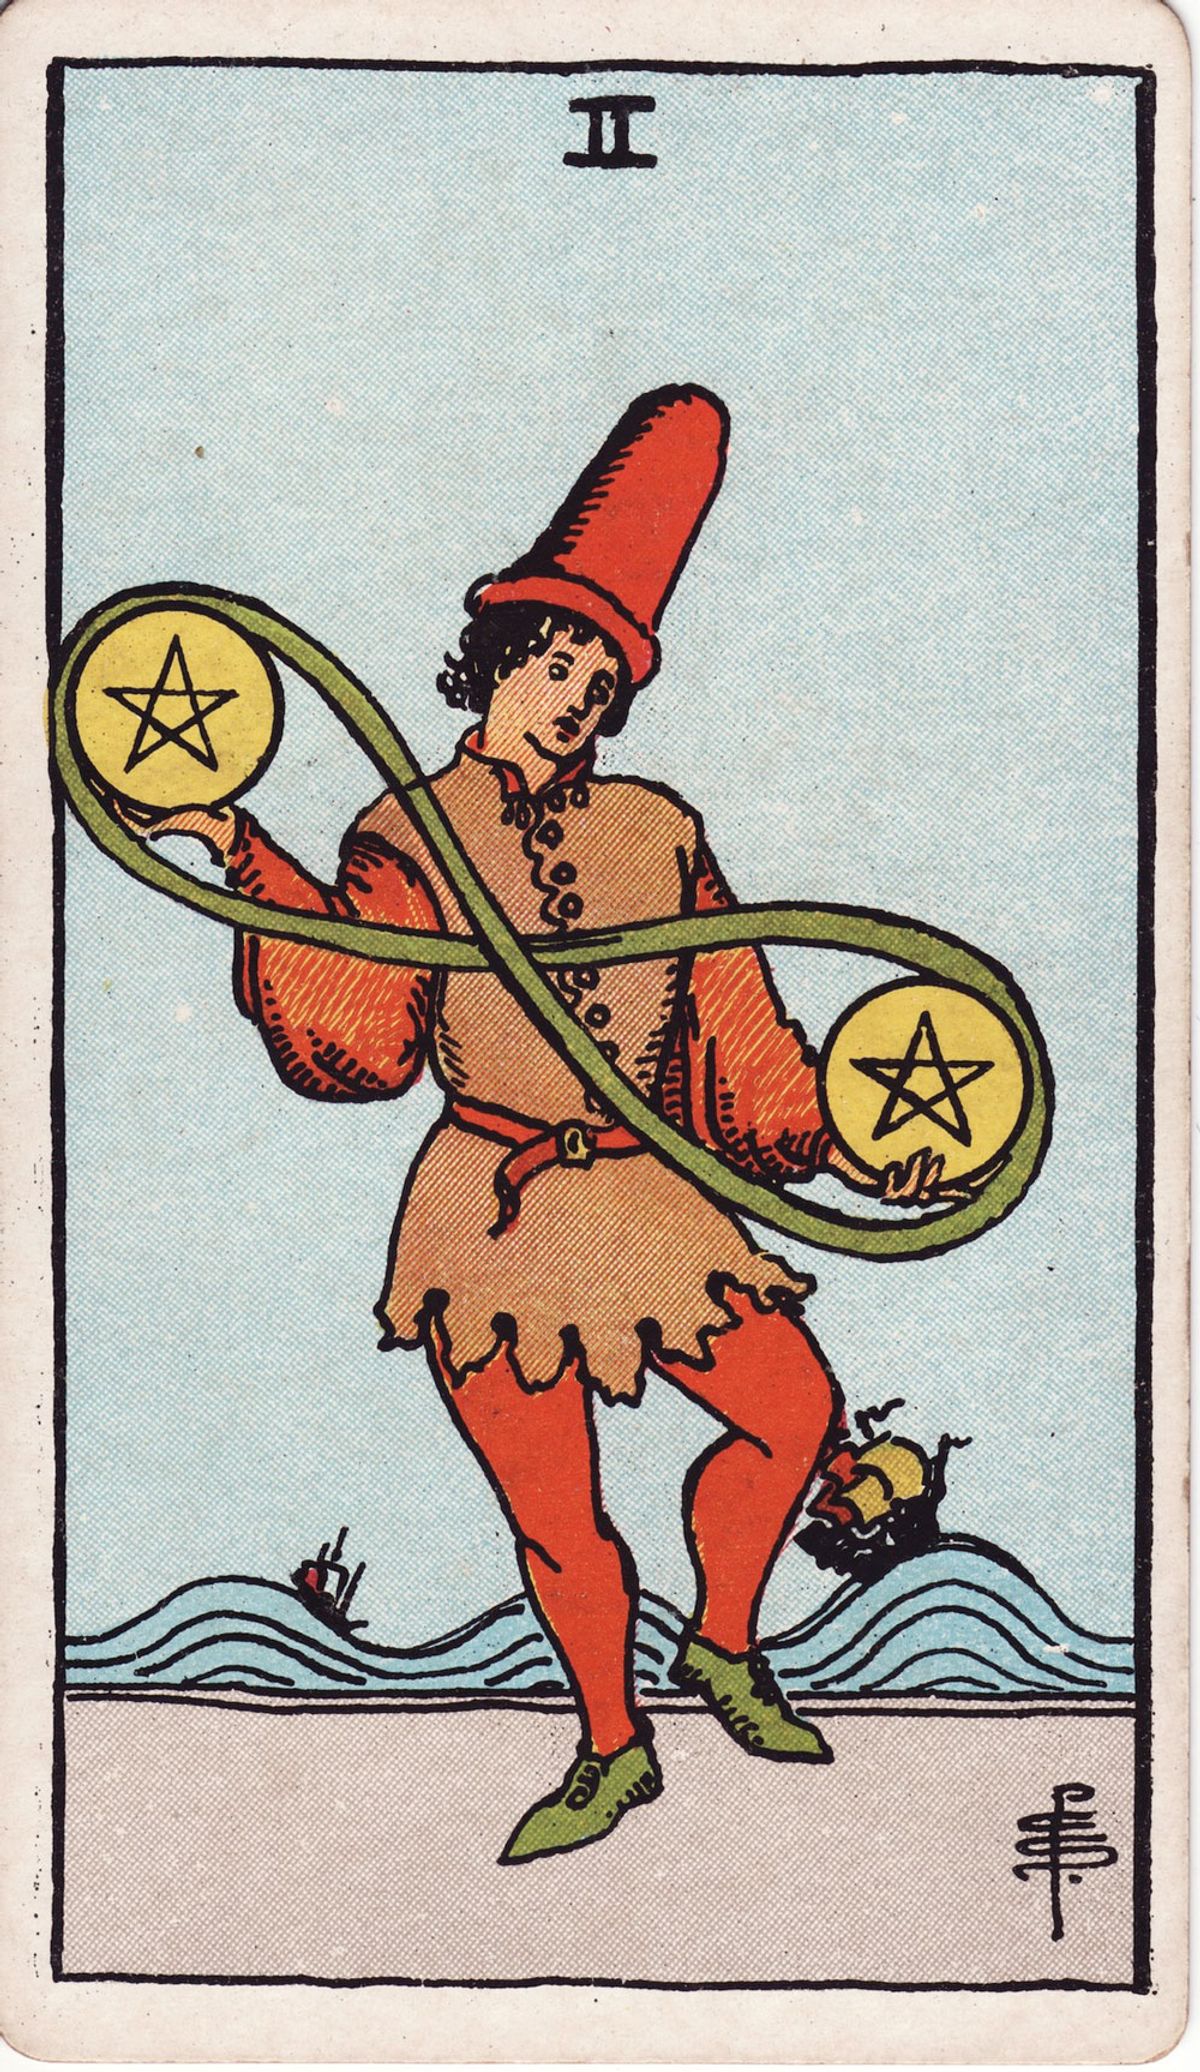 The critics’ journey begins with the Two of Pentacles 